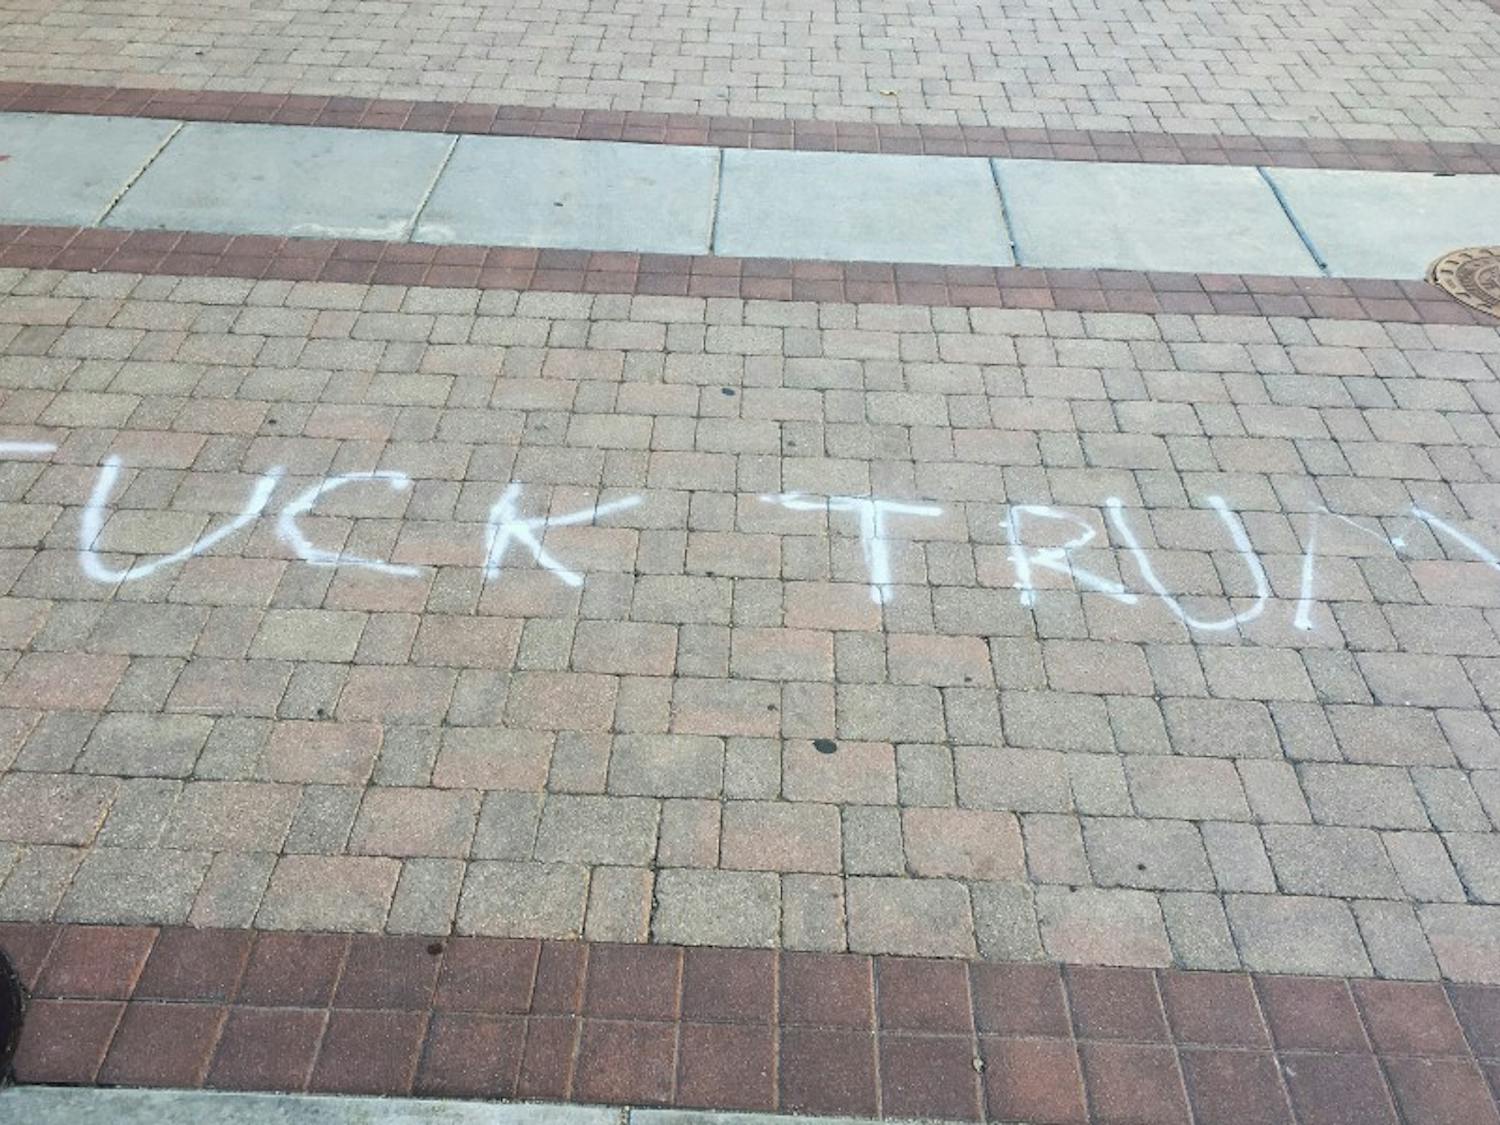 Two phrases, one reading “Fuck Trump” and the other “Black Lives Matter,” were spray-painted on East Campus Mall Wednesday.